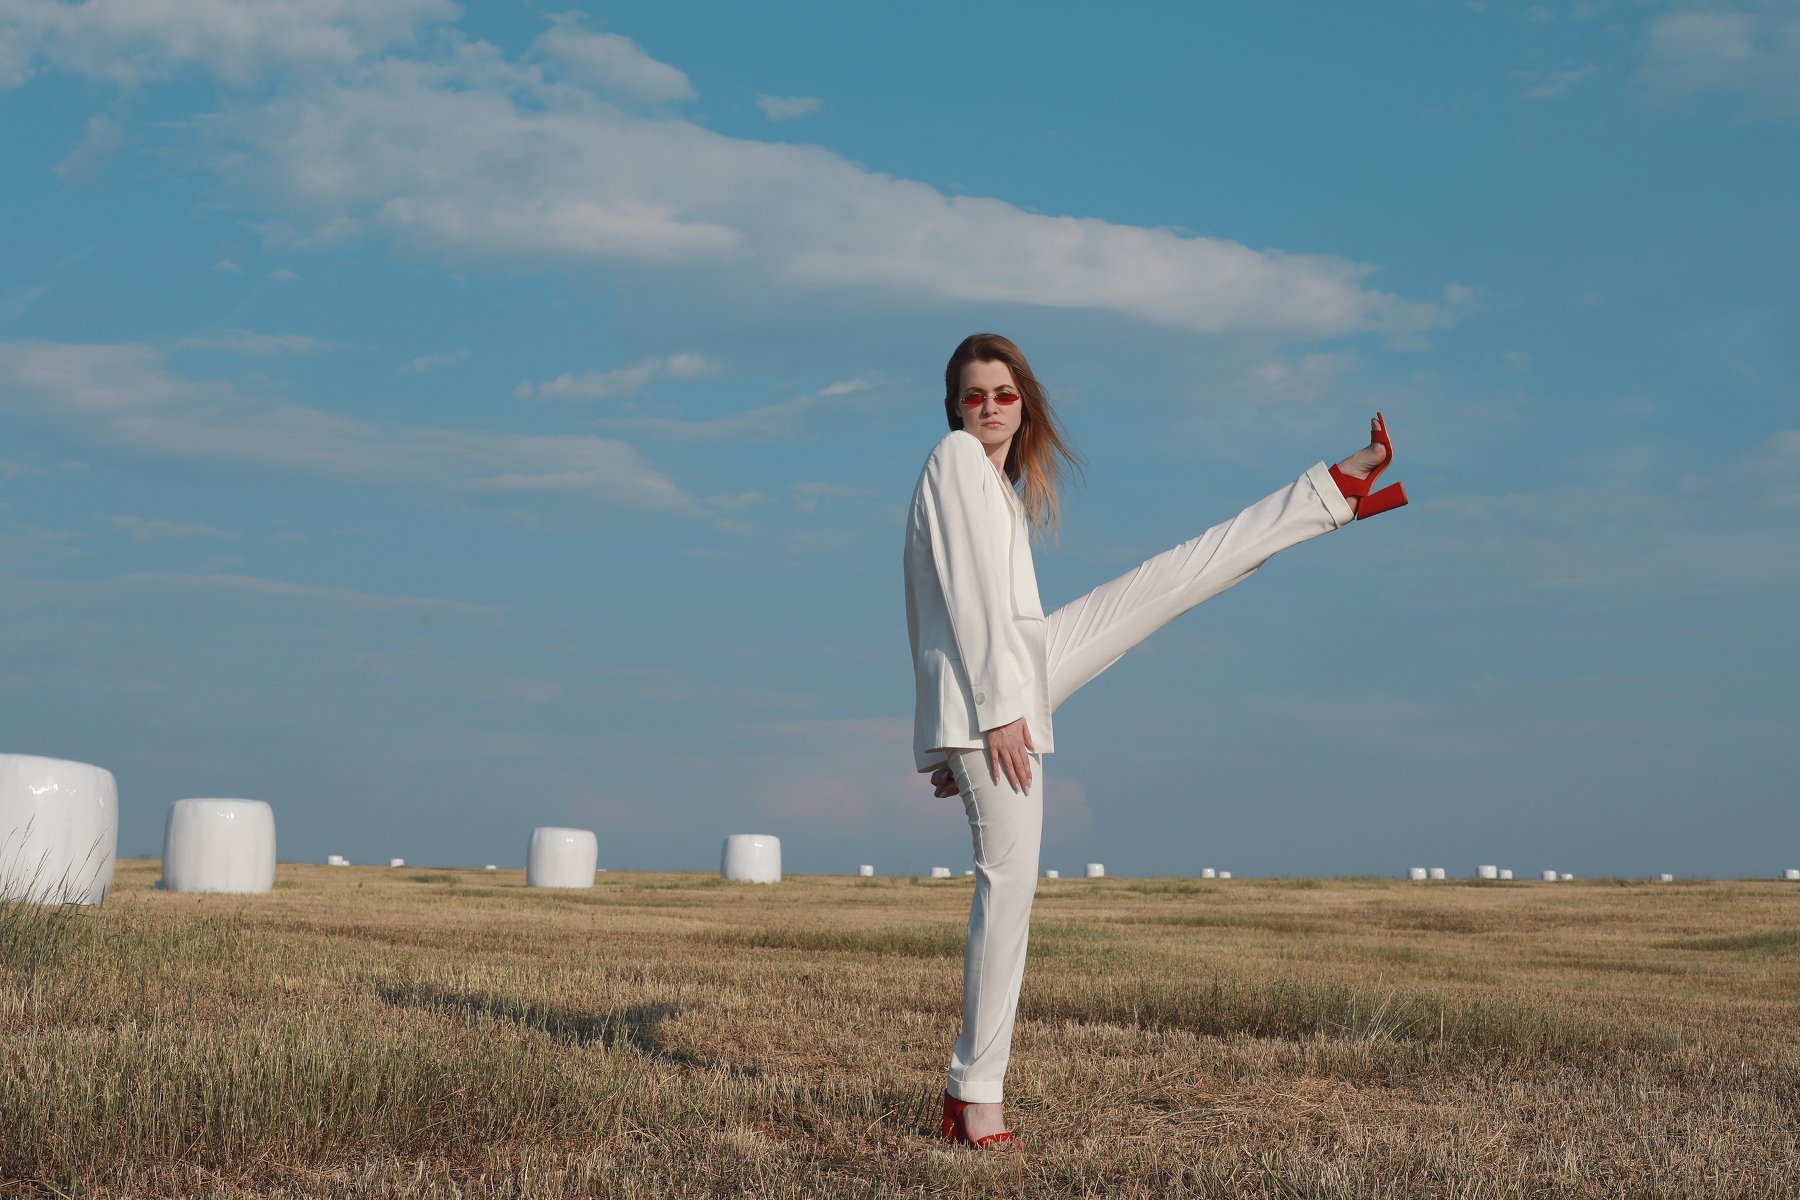 white, outdoor, blue sky, girl in white, red shoes, Алина Абрамова